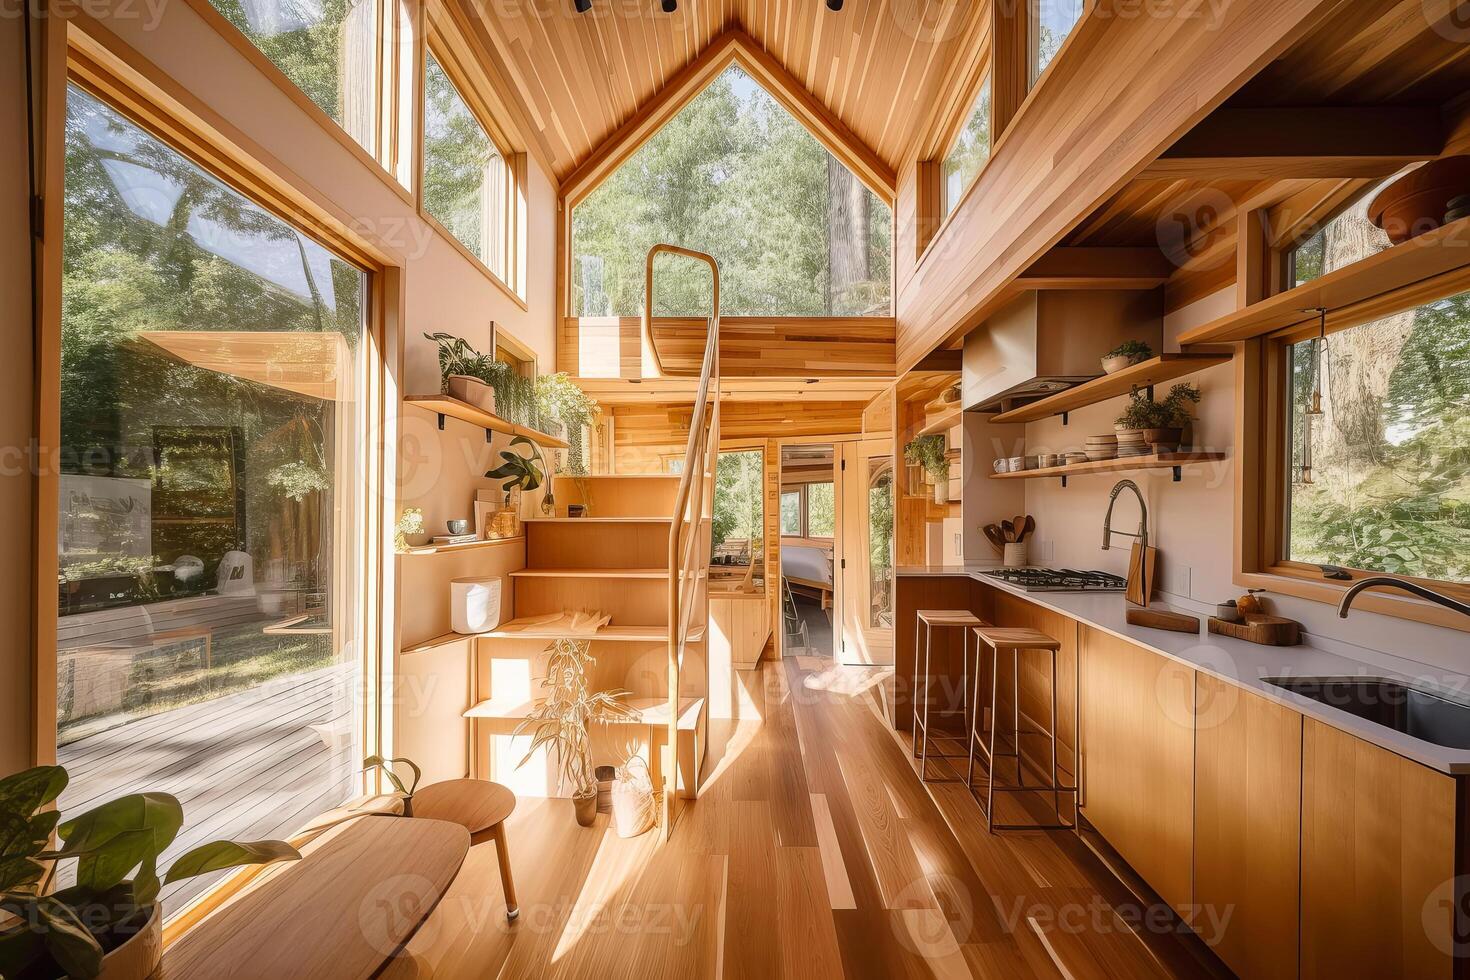 Tiny house interior with natural wooden decor. illustration photo